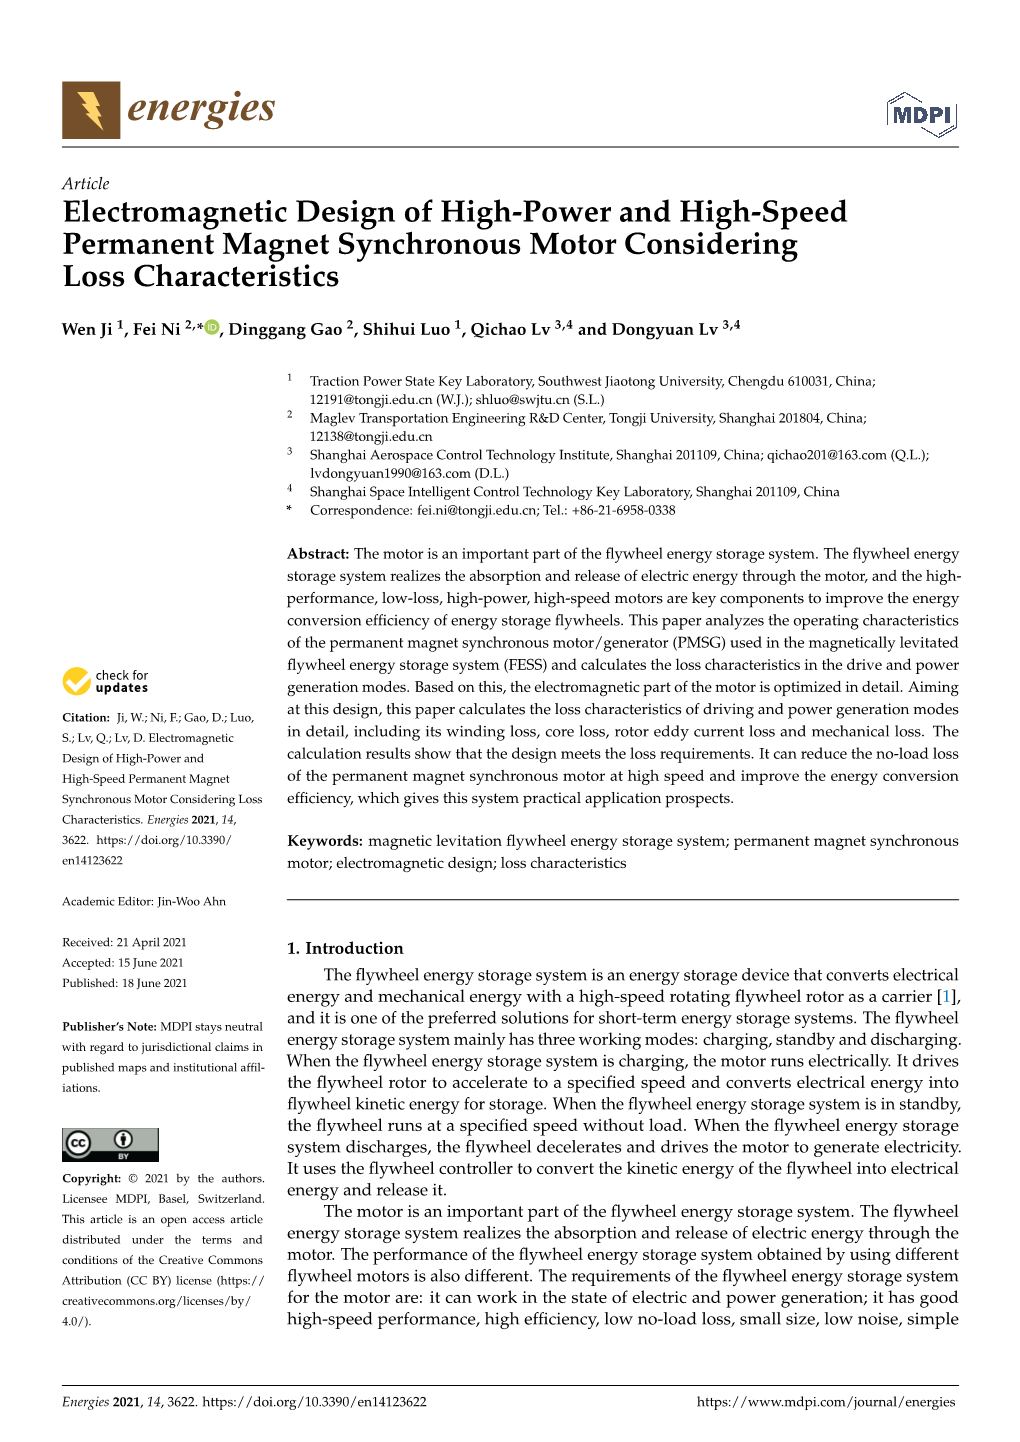 Electromagnetic Design of High-Power and High-Speed Permanent Magnet Synchronous Motor Considering Loss Characteristics